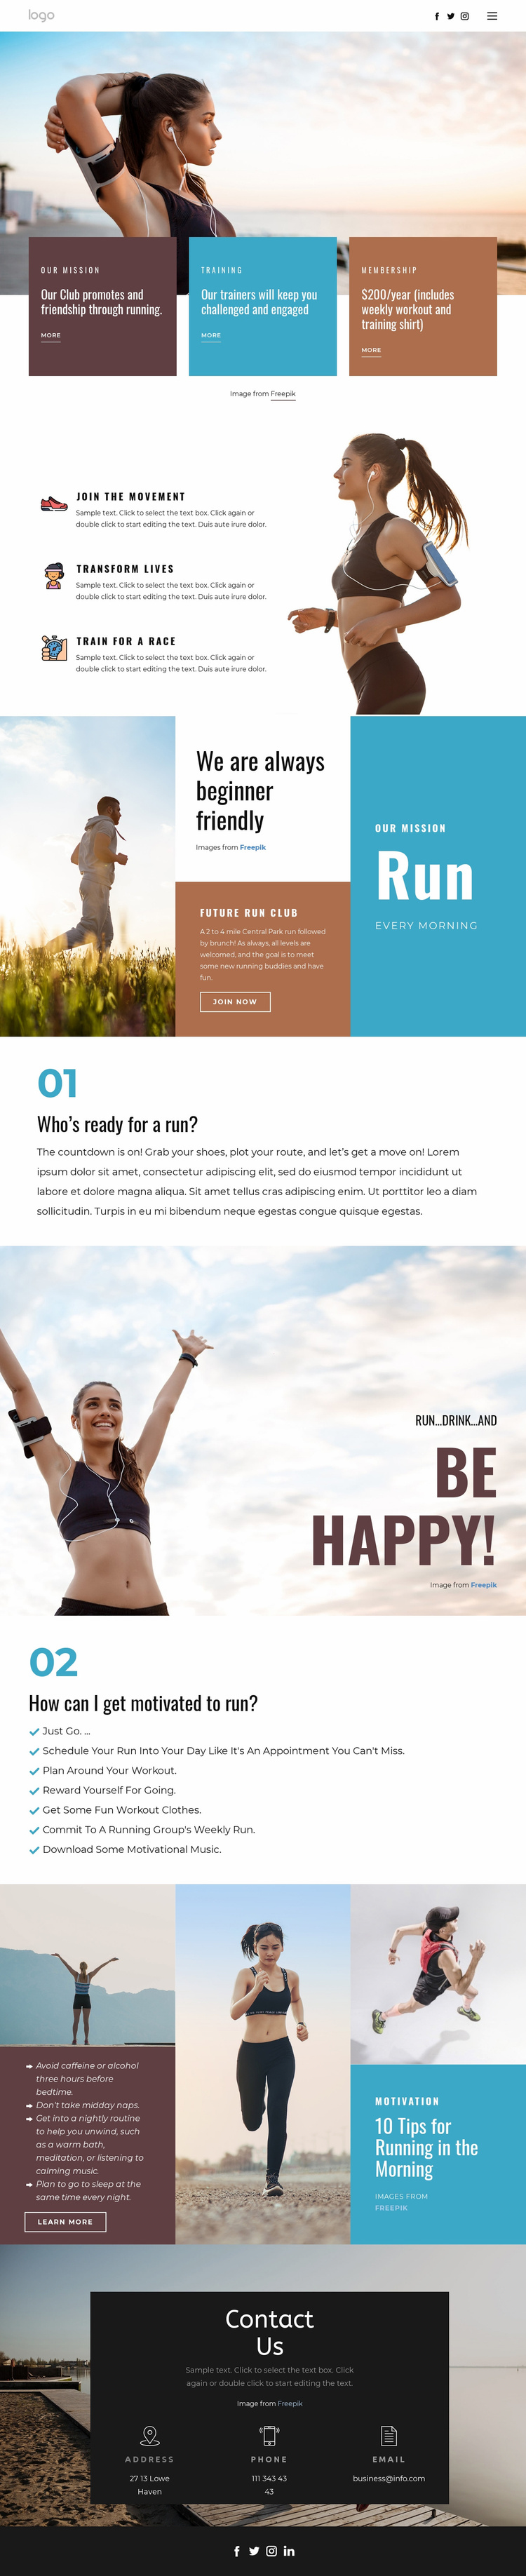 Running club for sports Website Template